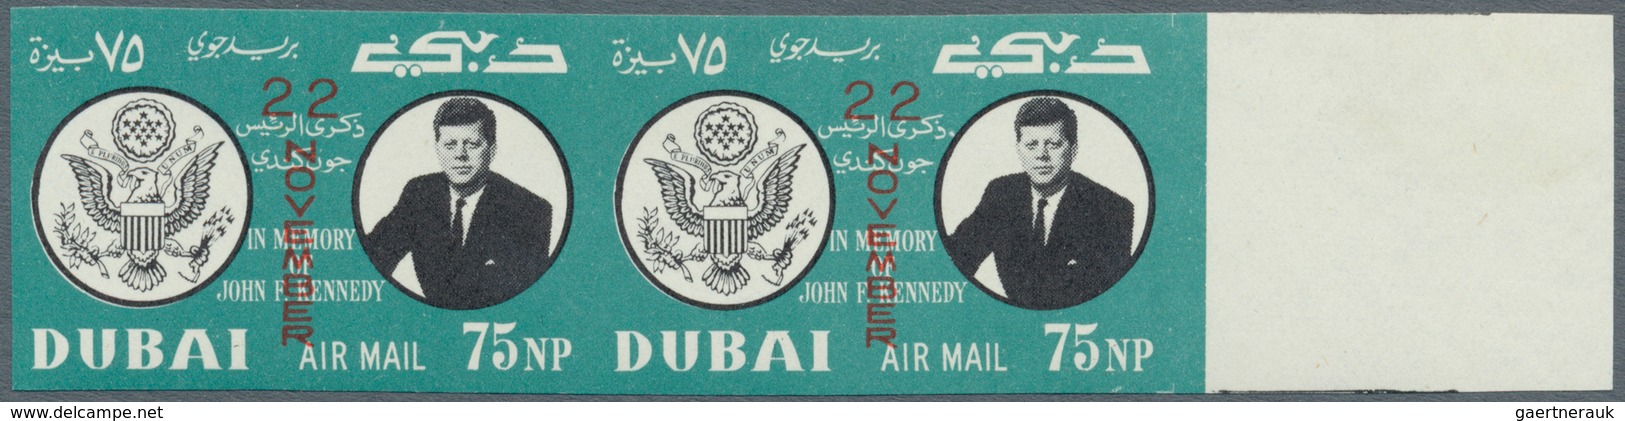 Dubai: 1964, Kennedy (Mi. # 113/115 and s/s # 22), collection with varieties, inverted centers, miss